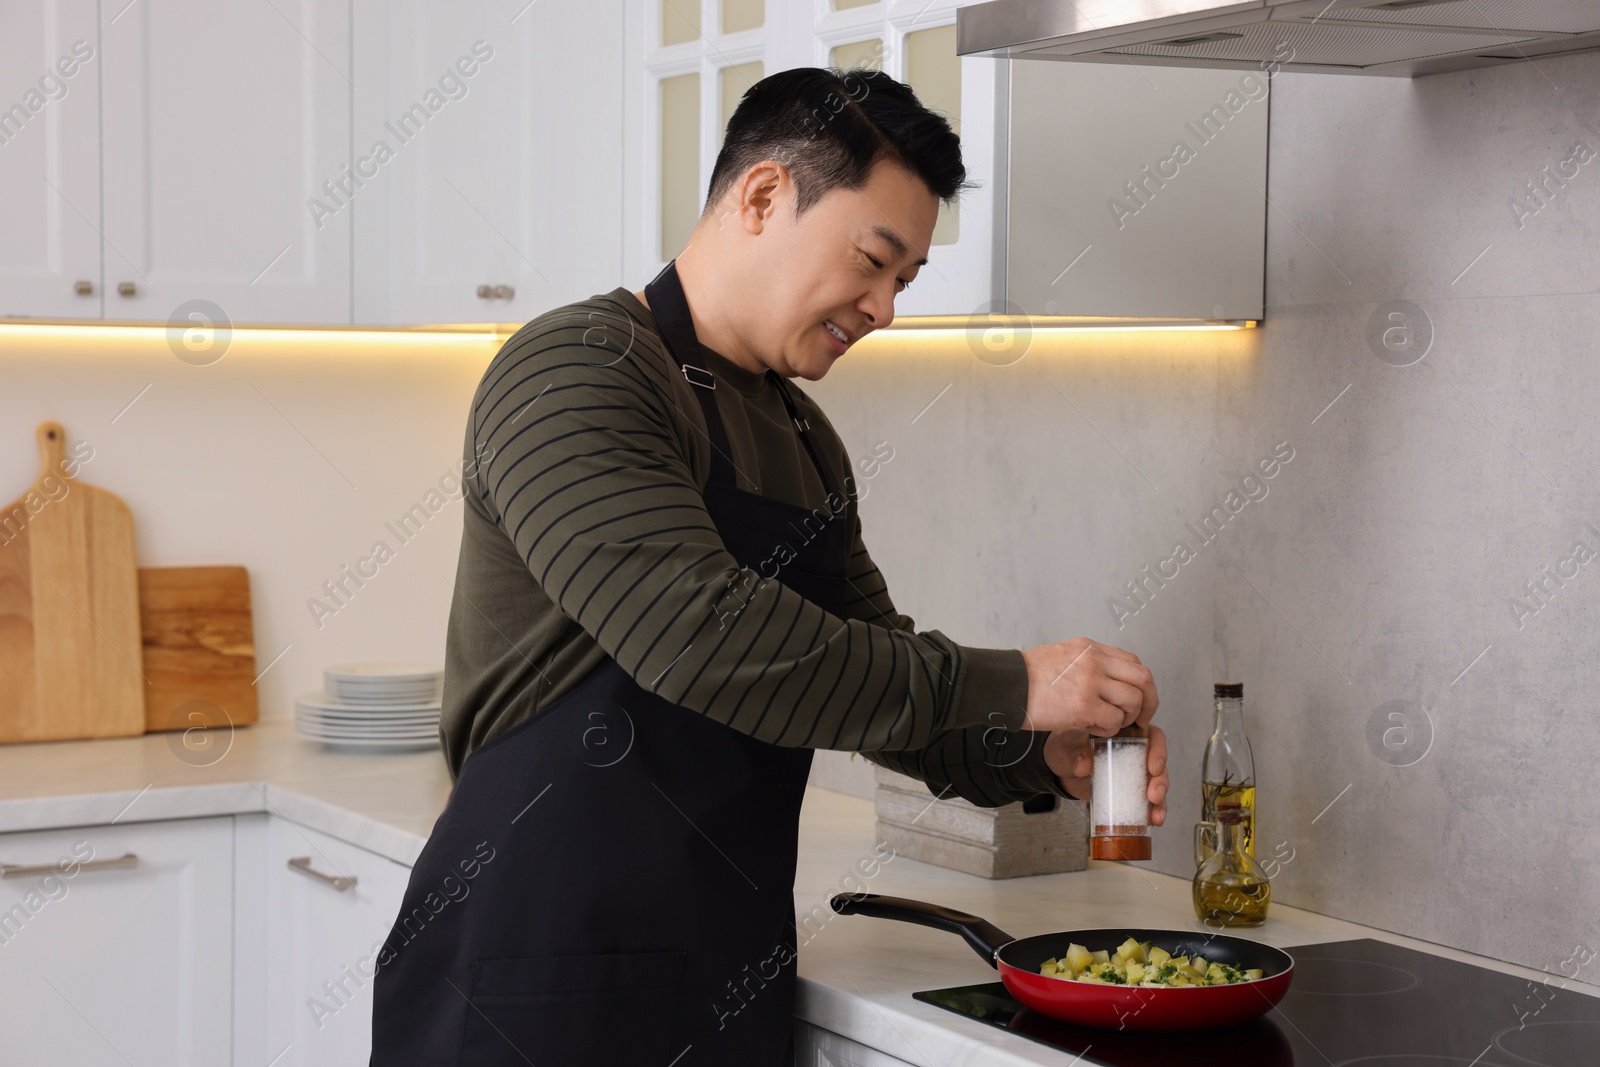 Photo of Cooking process. Man adding salt into frying pan in kitchen